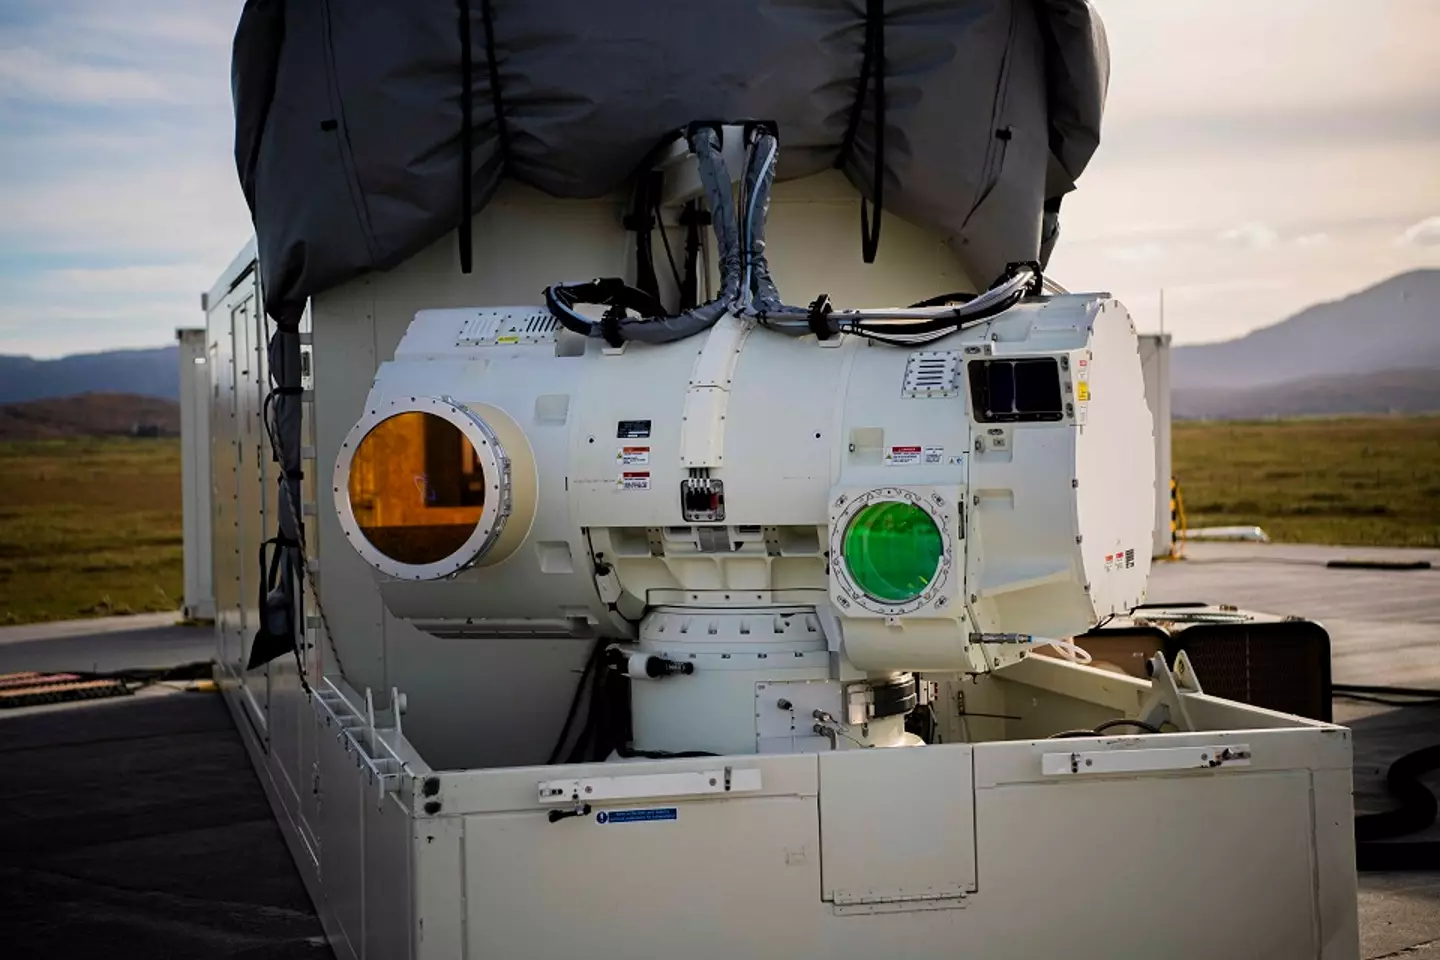 A newly declassified video shows the cutting-edge DragonFire laser weapon in action.